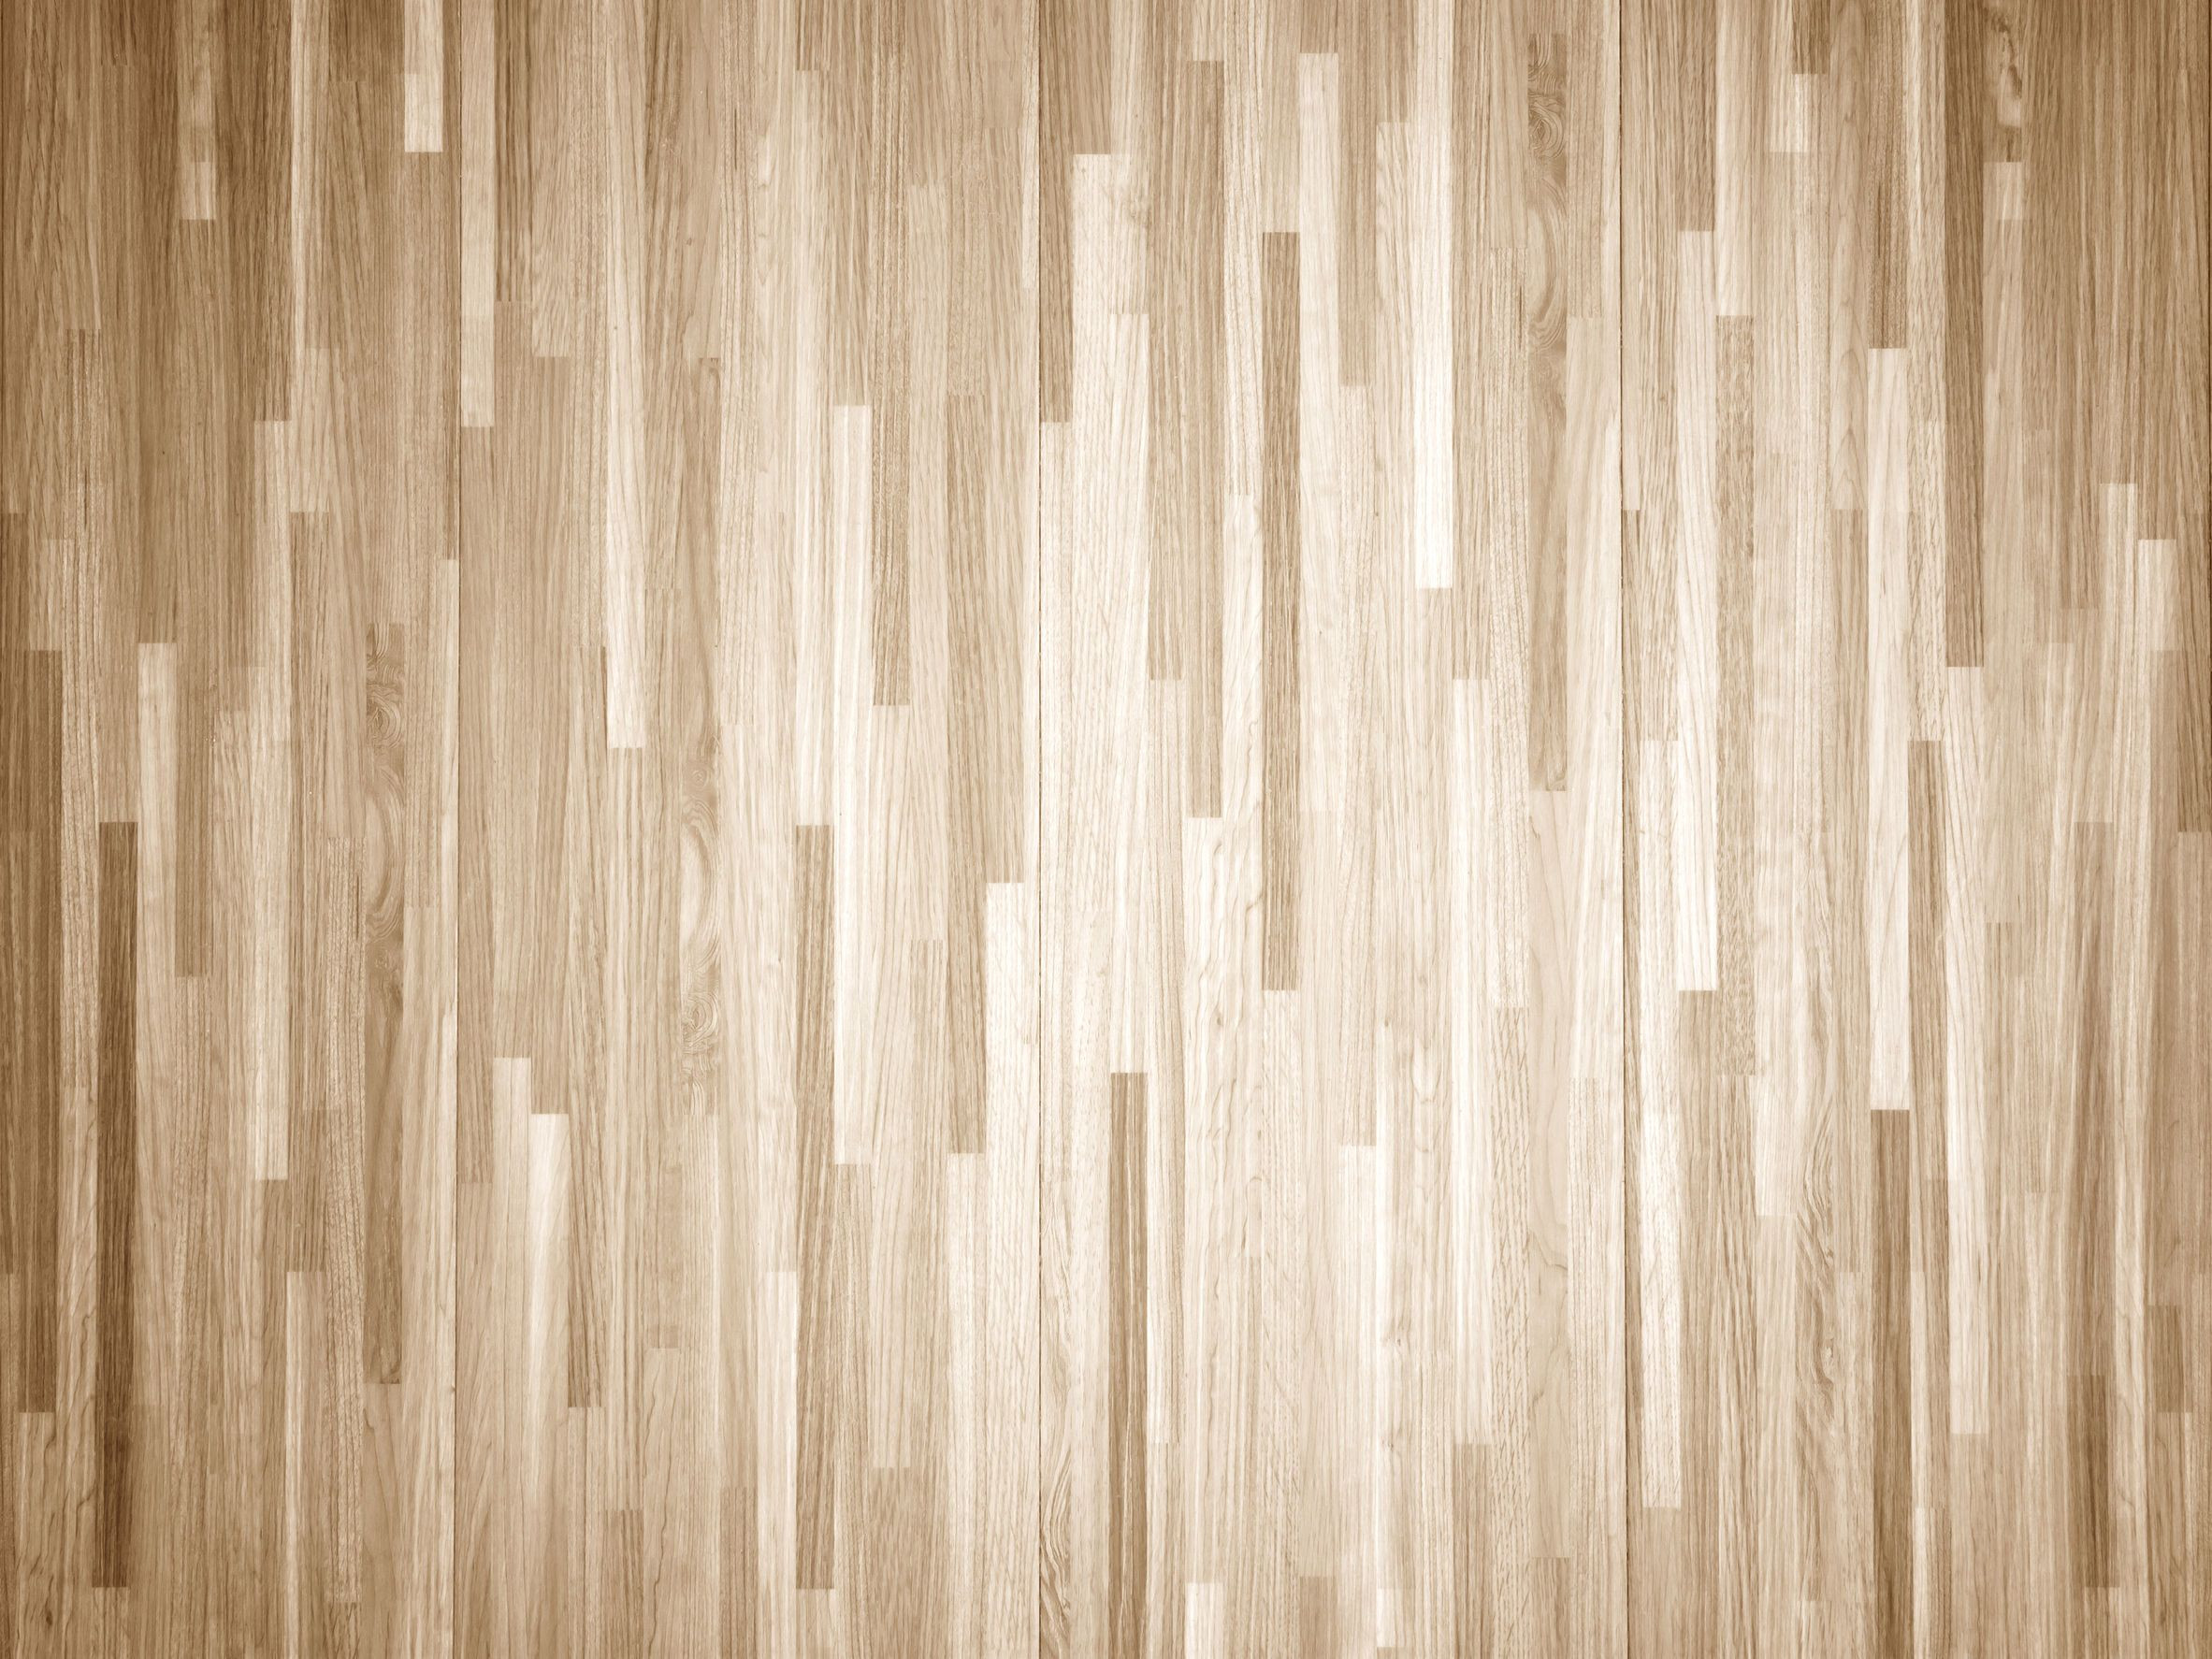 21 Awesome Hardwood Floor Refinishing Albuquerque 2024 free download hardwood floor refinishing albuquerque of how to chemically strip wood floors woodfloordoctor com throughout you